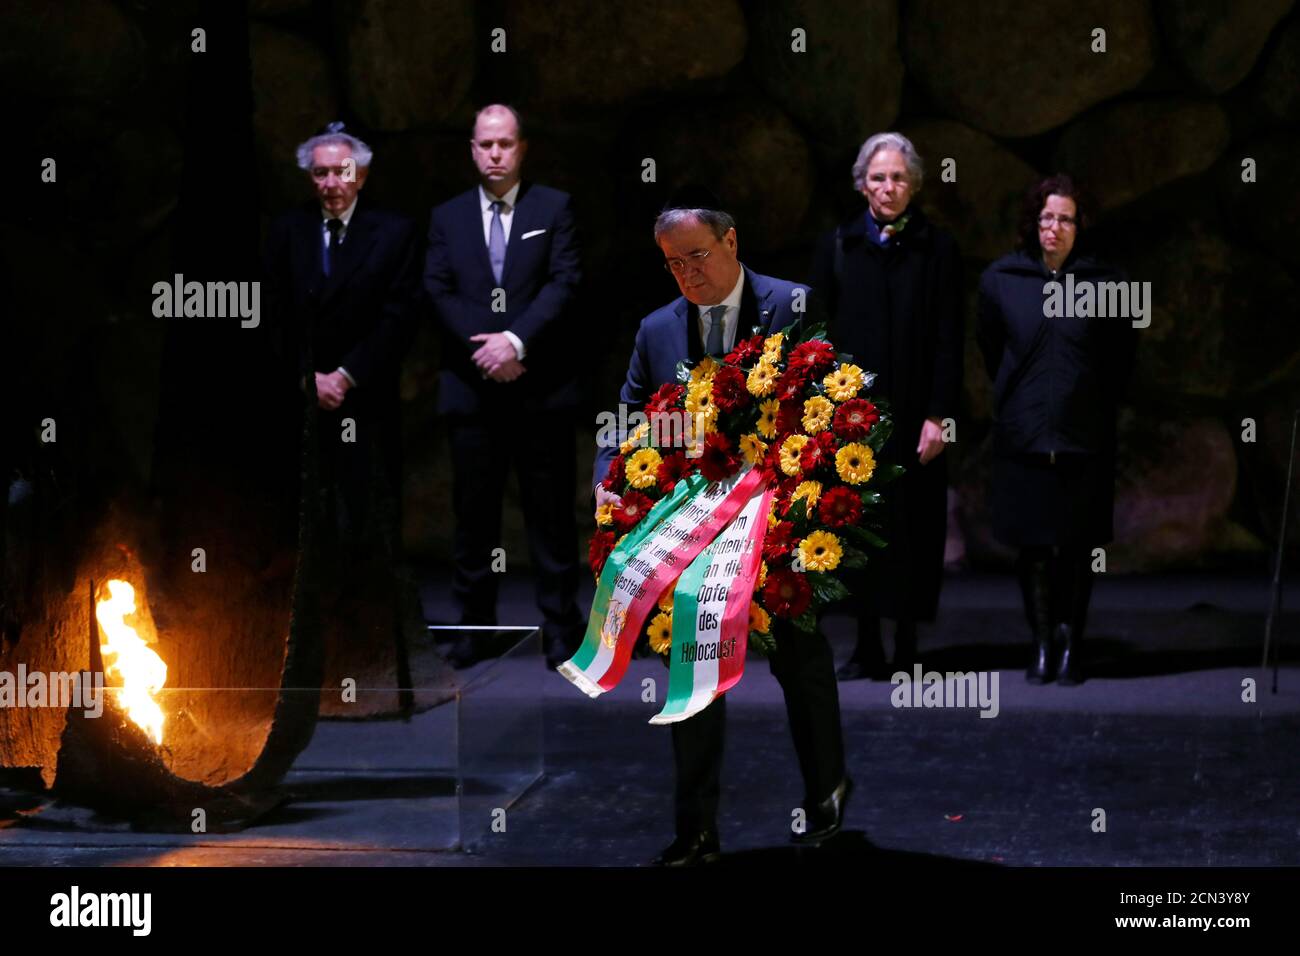 German politician Armin Laschet, Minister-President of Nordrhein-Westphalen, lays a wreath during a ceremony commemorating the six million Jews killed by the Nazis in the Holocaust, in the Hall of Remembrance at Yad Vashem World Holocaust Remembrance Center in Jerusalem March 1, 2020. REUTERS/Ronen Zvulun Stock Photo